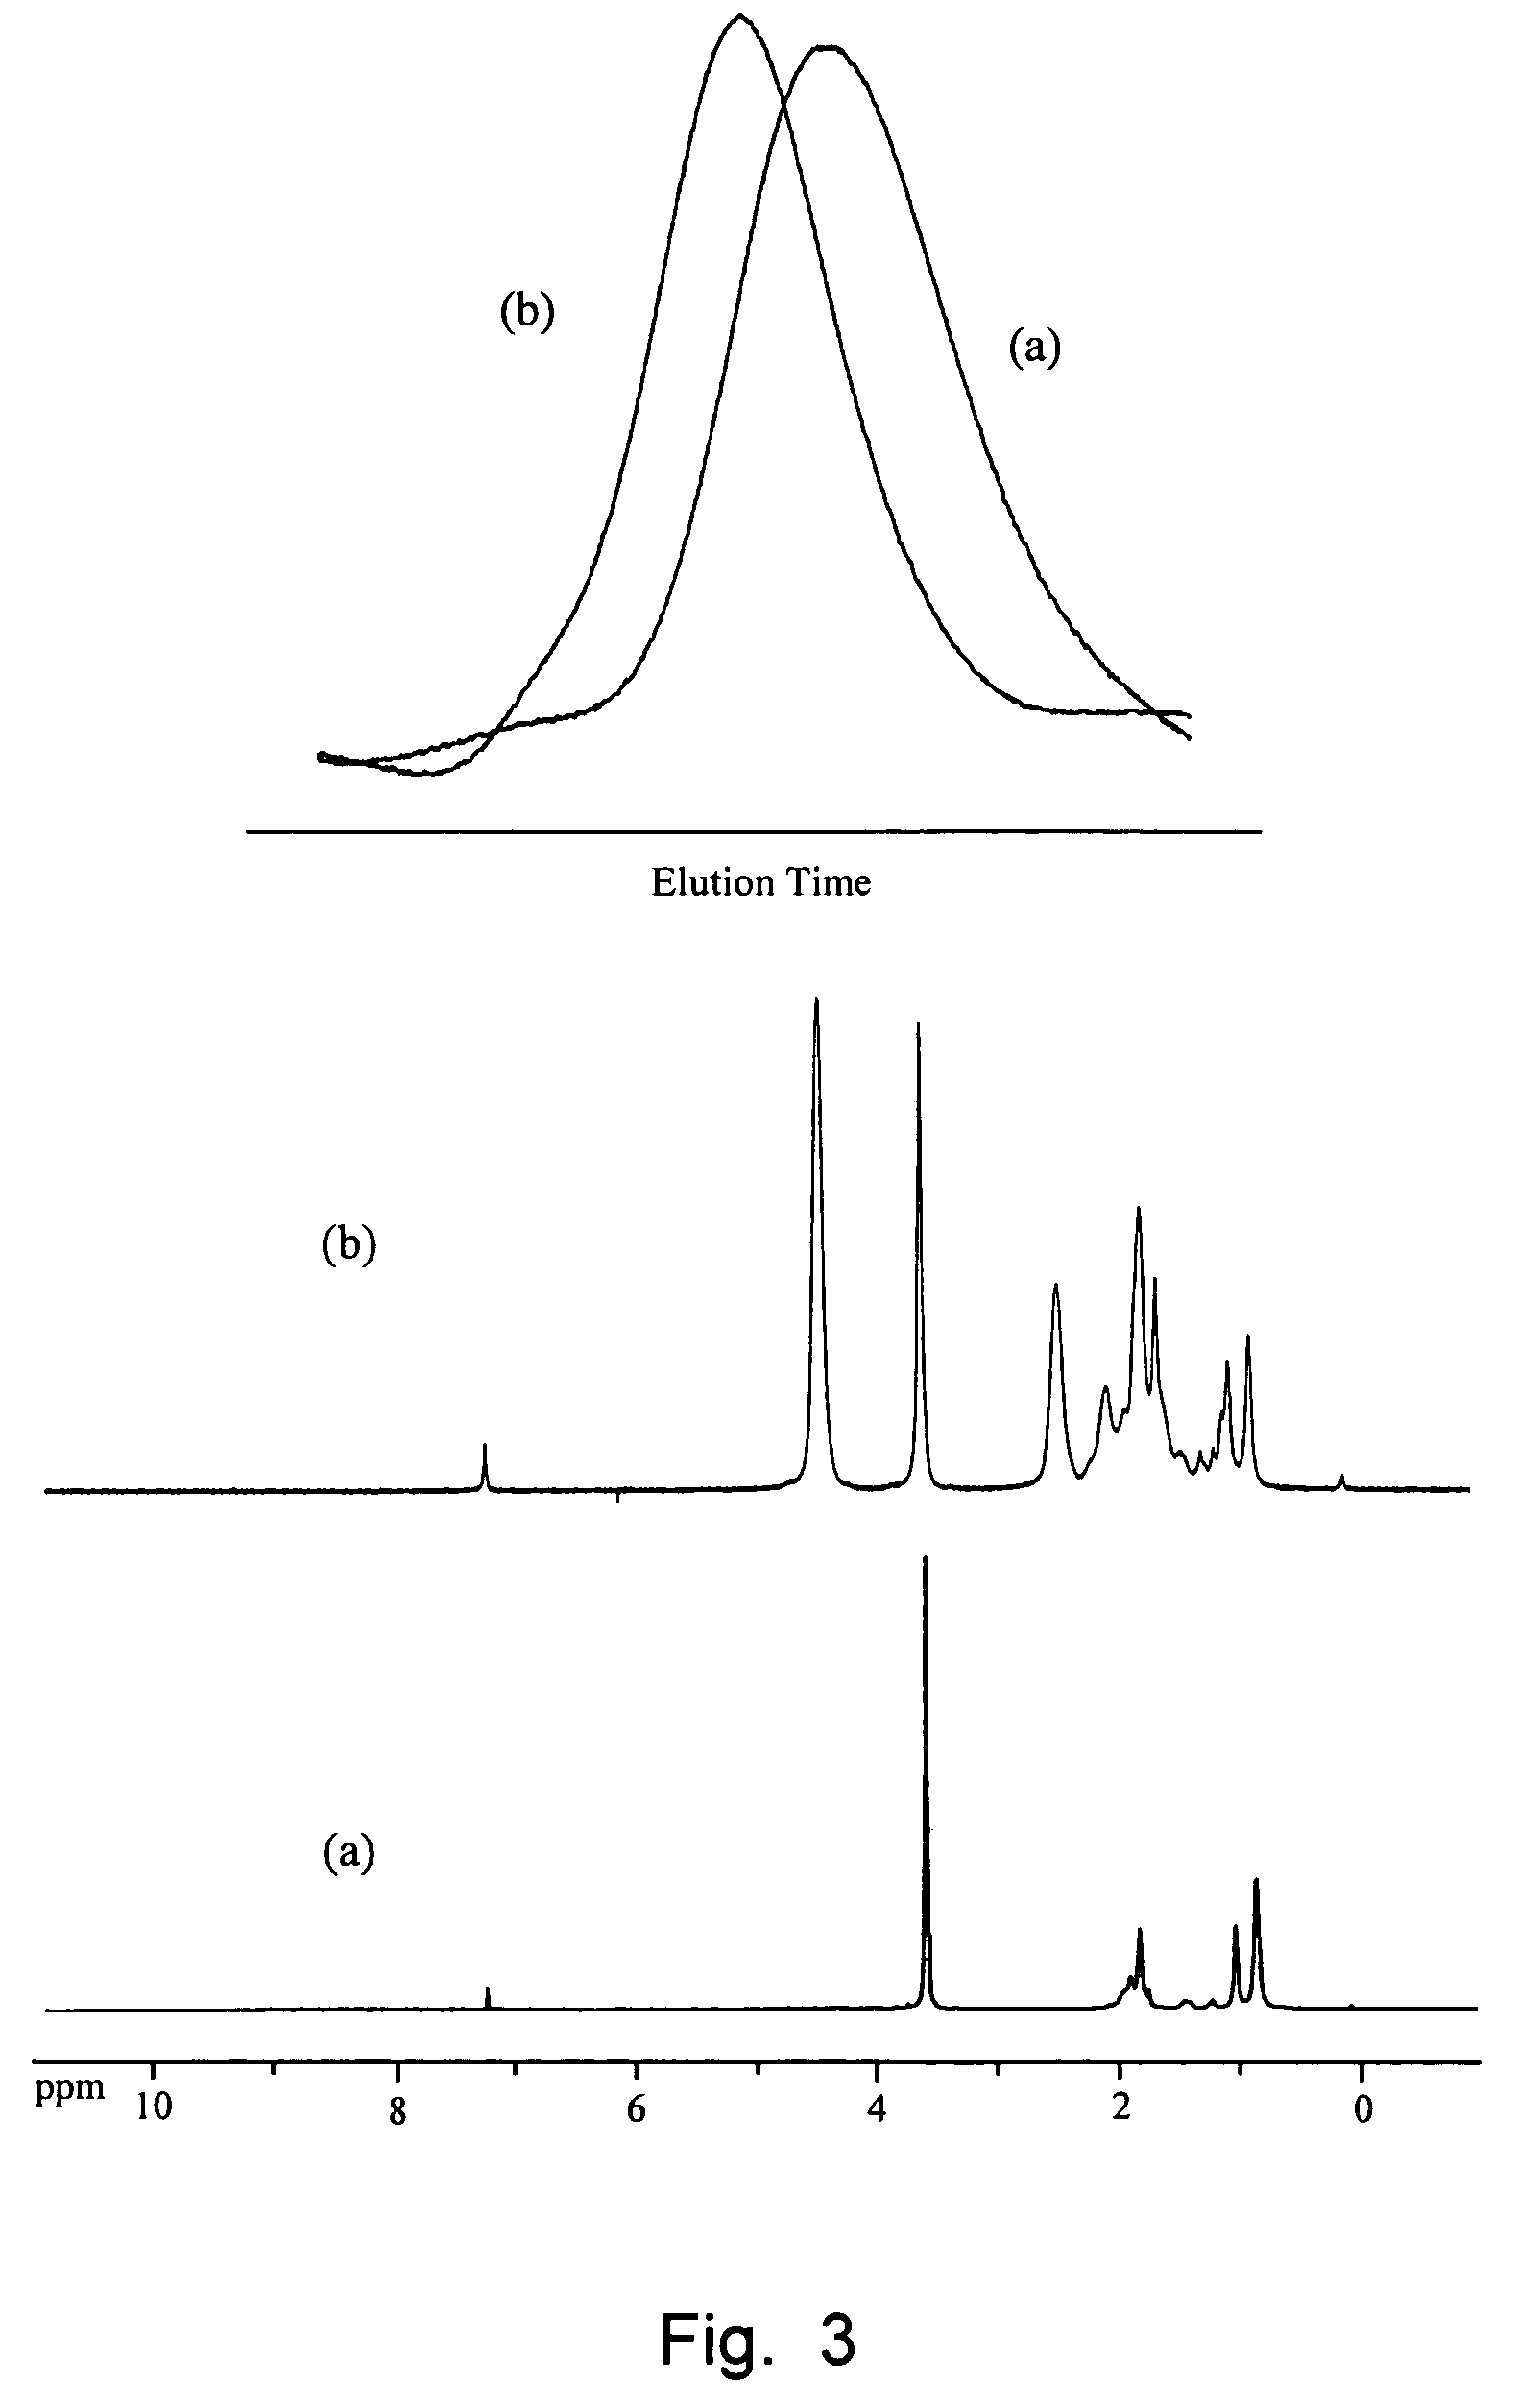 Telechelic polymers containing reactive functional groups